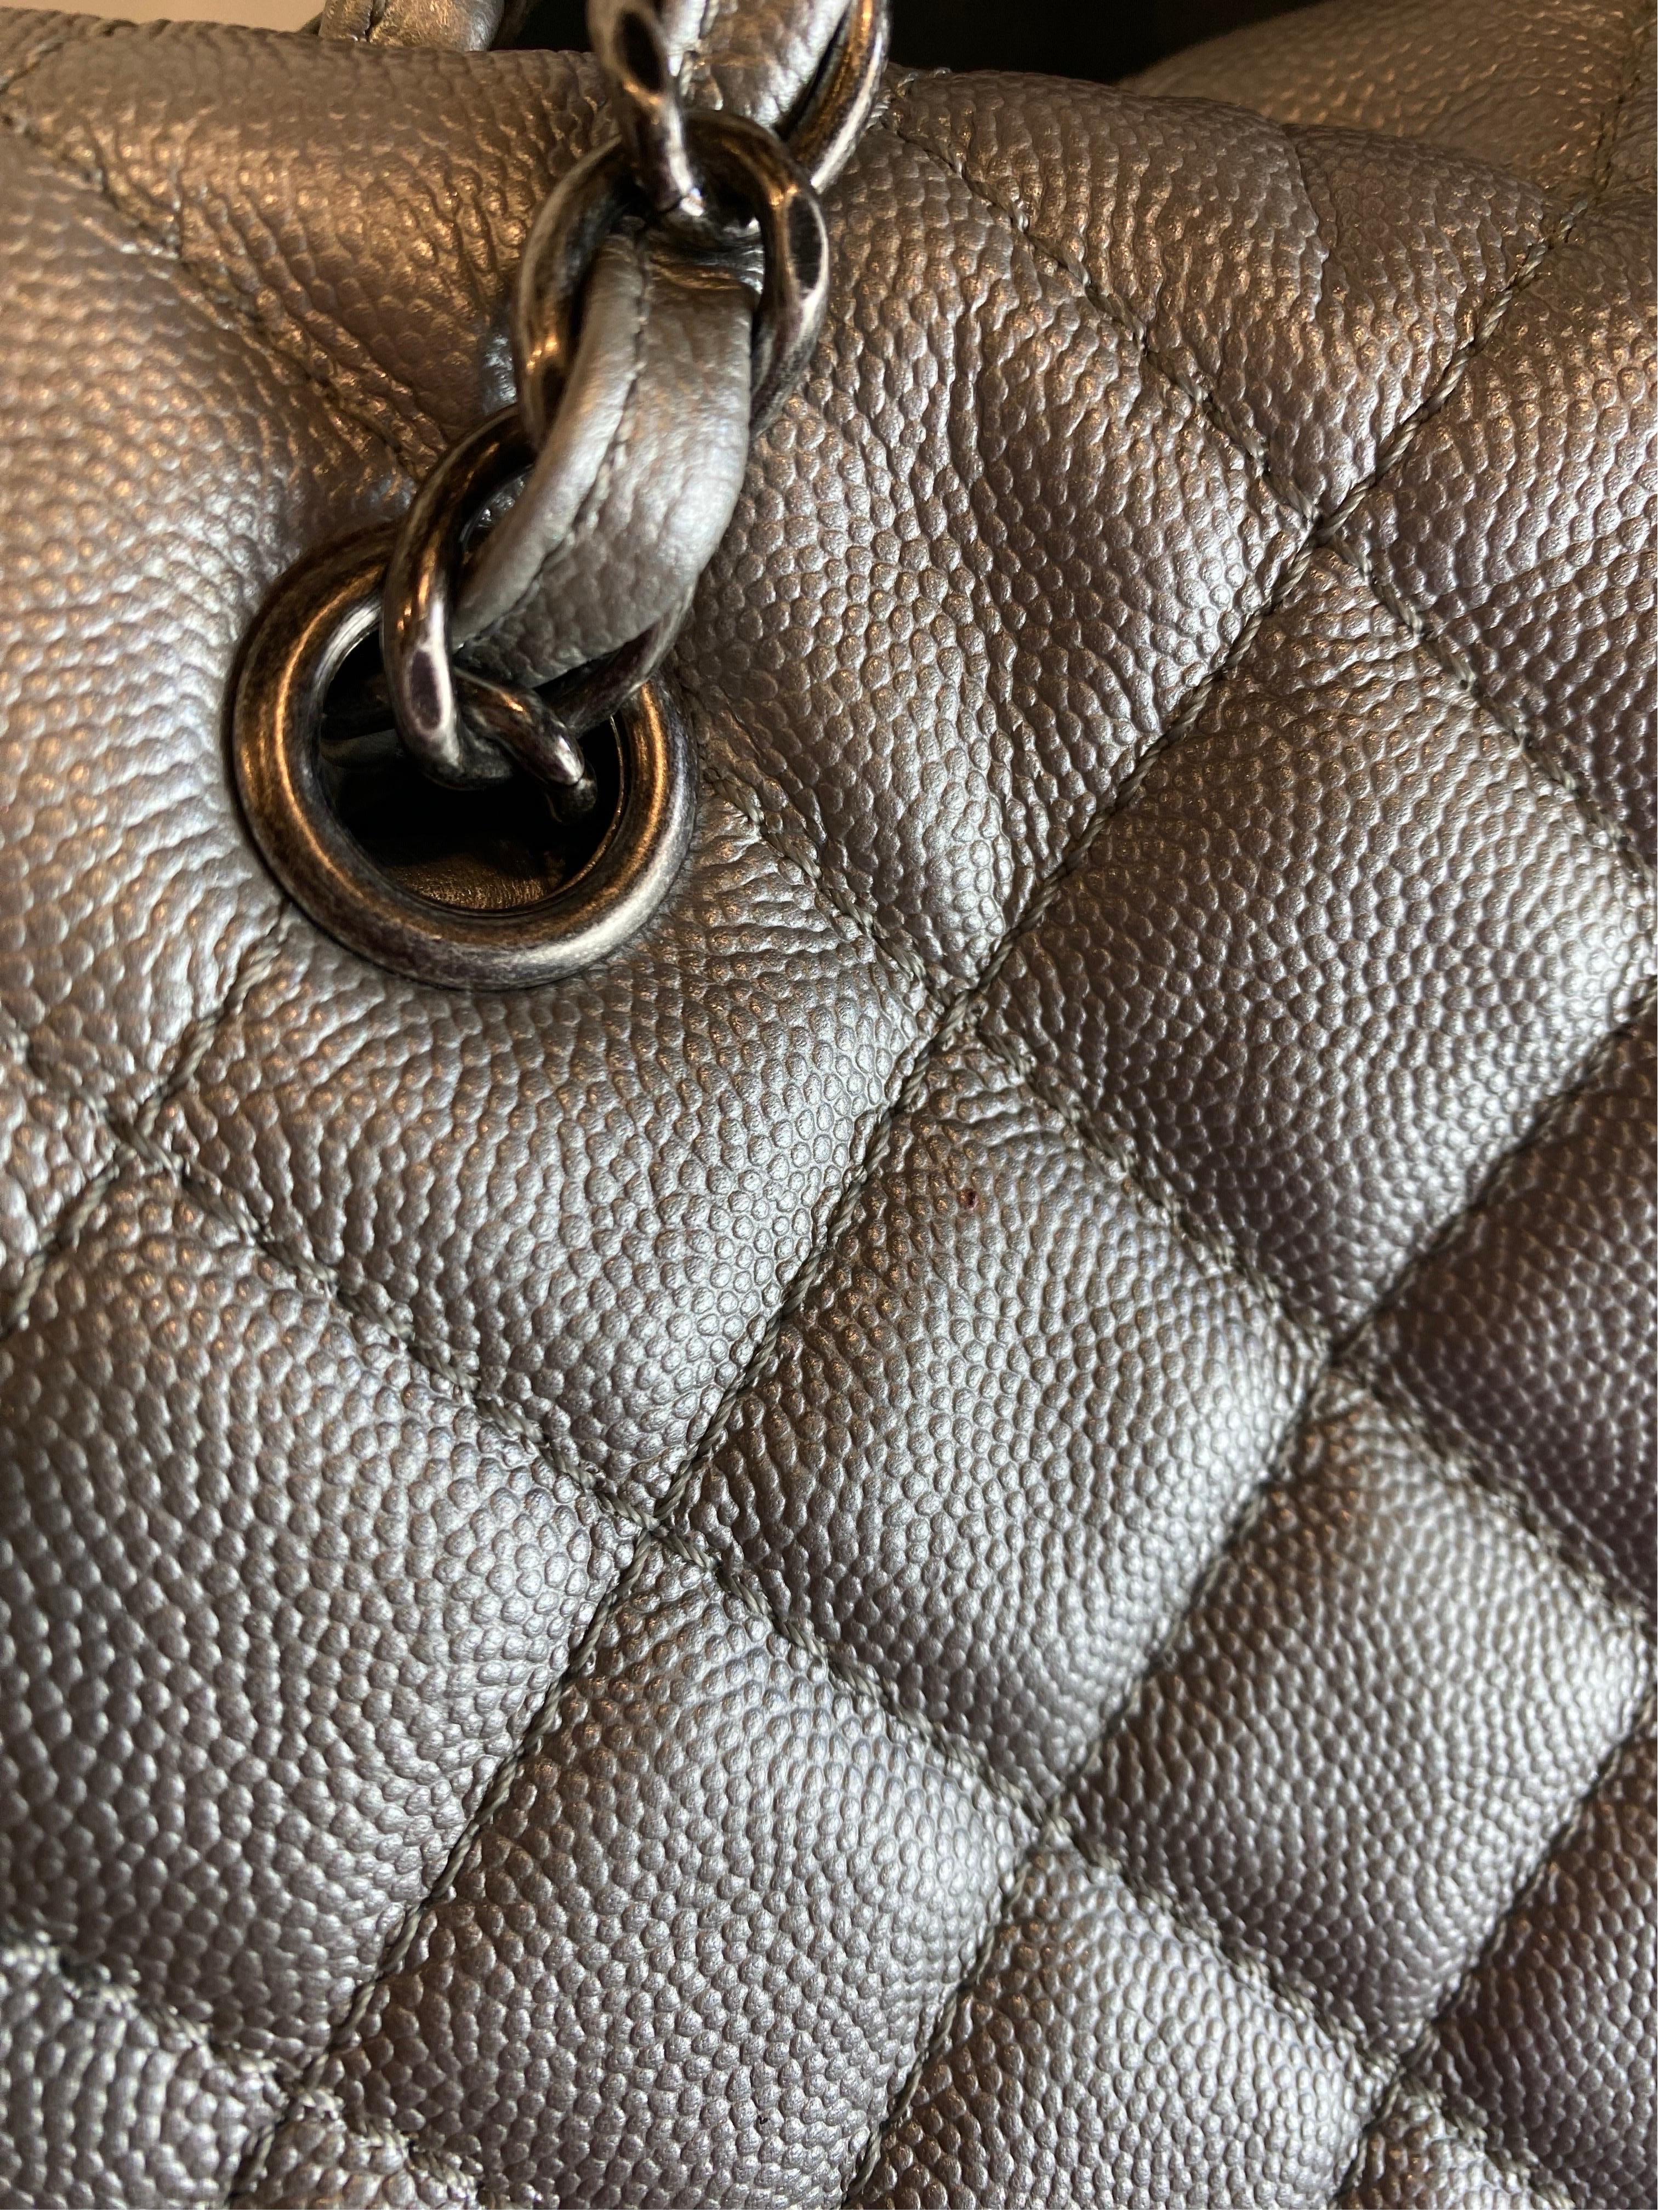 Chanel XXL travel bag.
Made of silver leather and blackened silver hardware.
Clip closure.
Inside it has two compartments, one of which closes with a zip.
30cm high
47 cm wide
12cm deep
Excellent general condition, shows minimal signs of use.
Has a